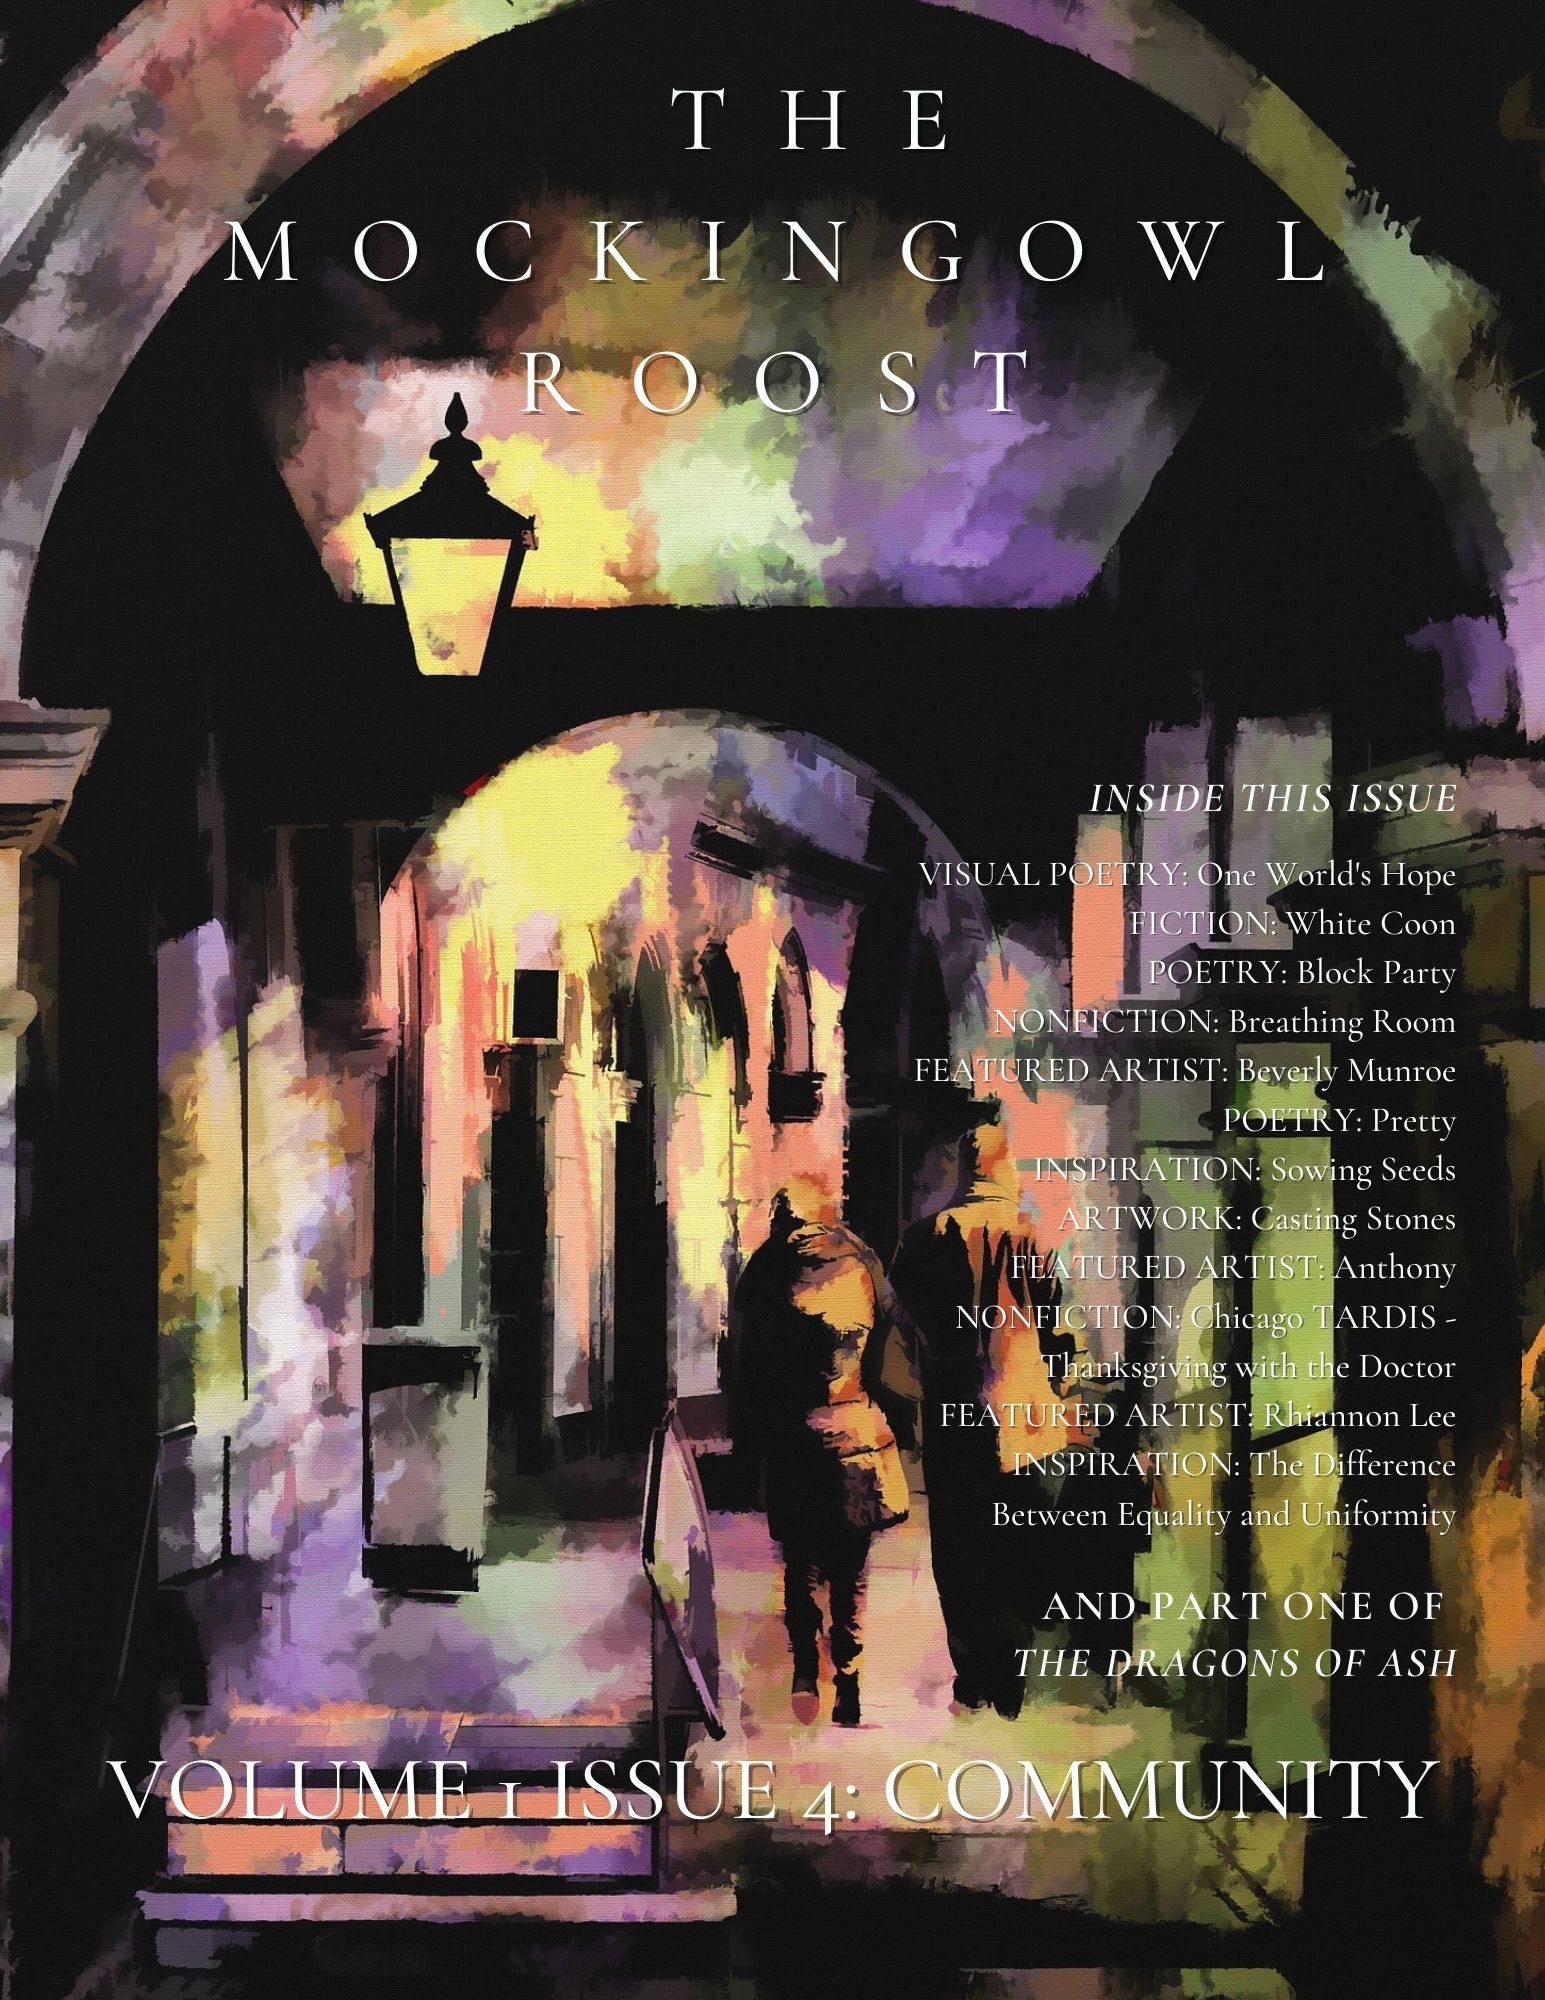 cover image of the MockingOwl Roost, Volume 1, Issue 4: Community